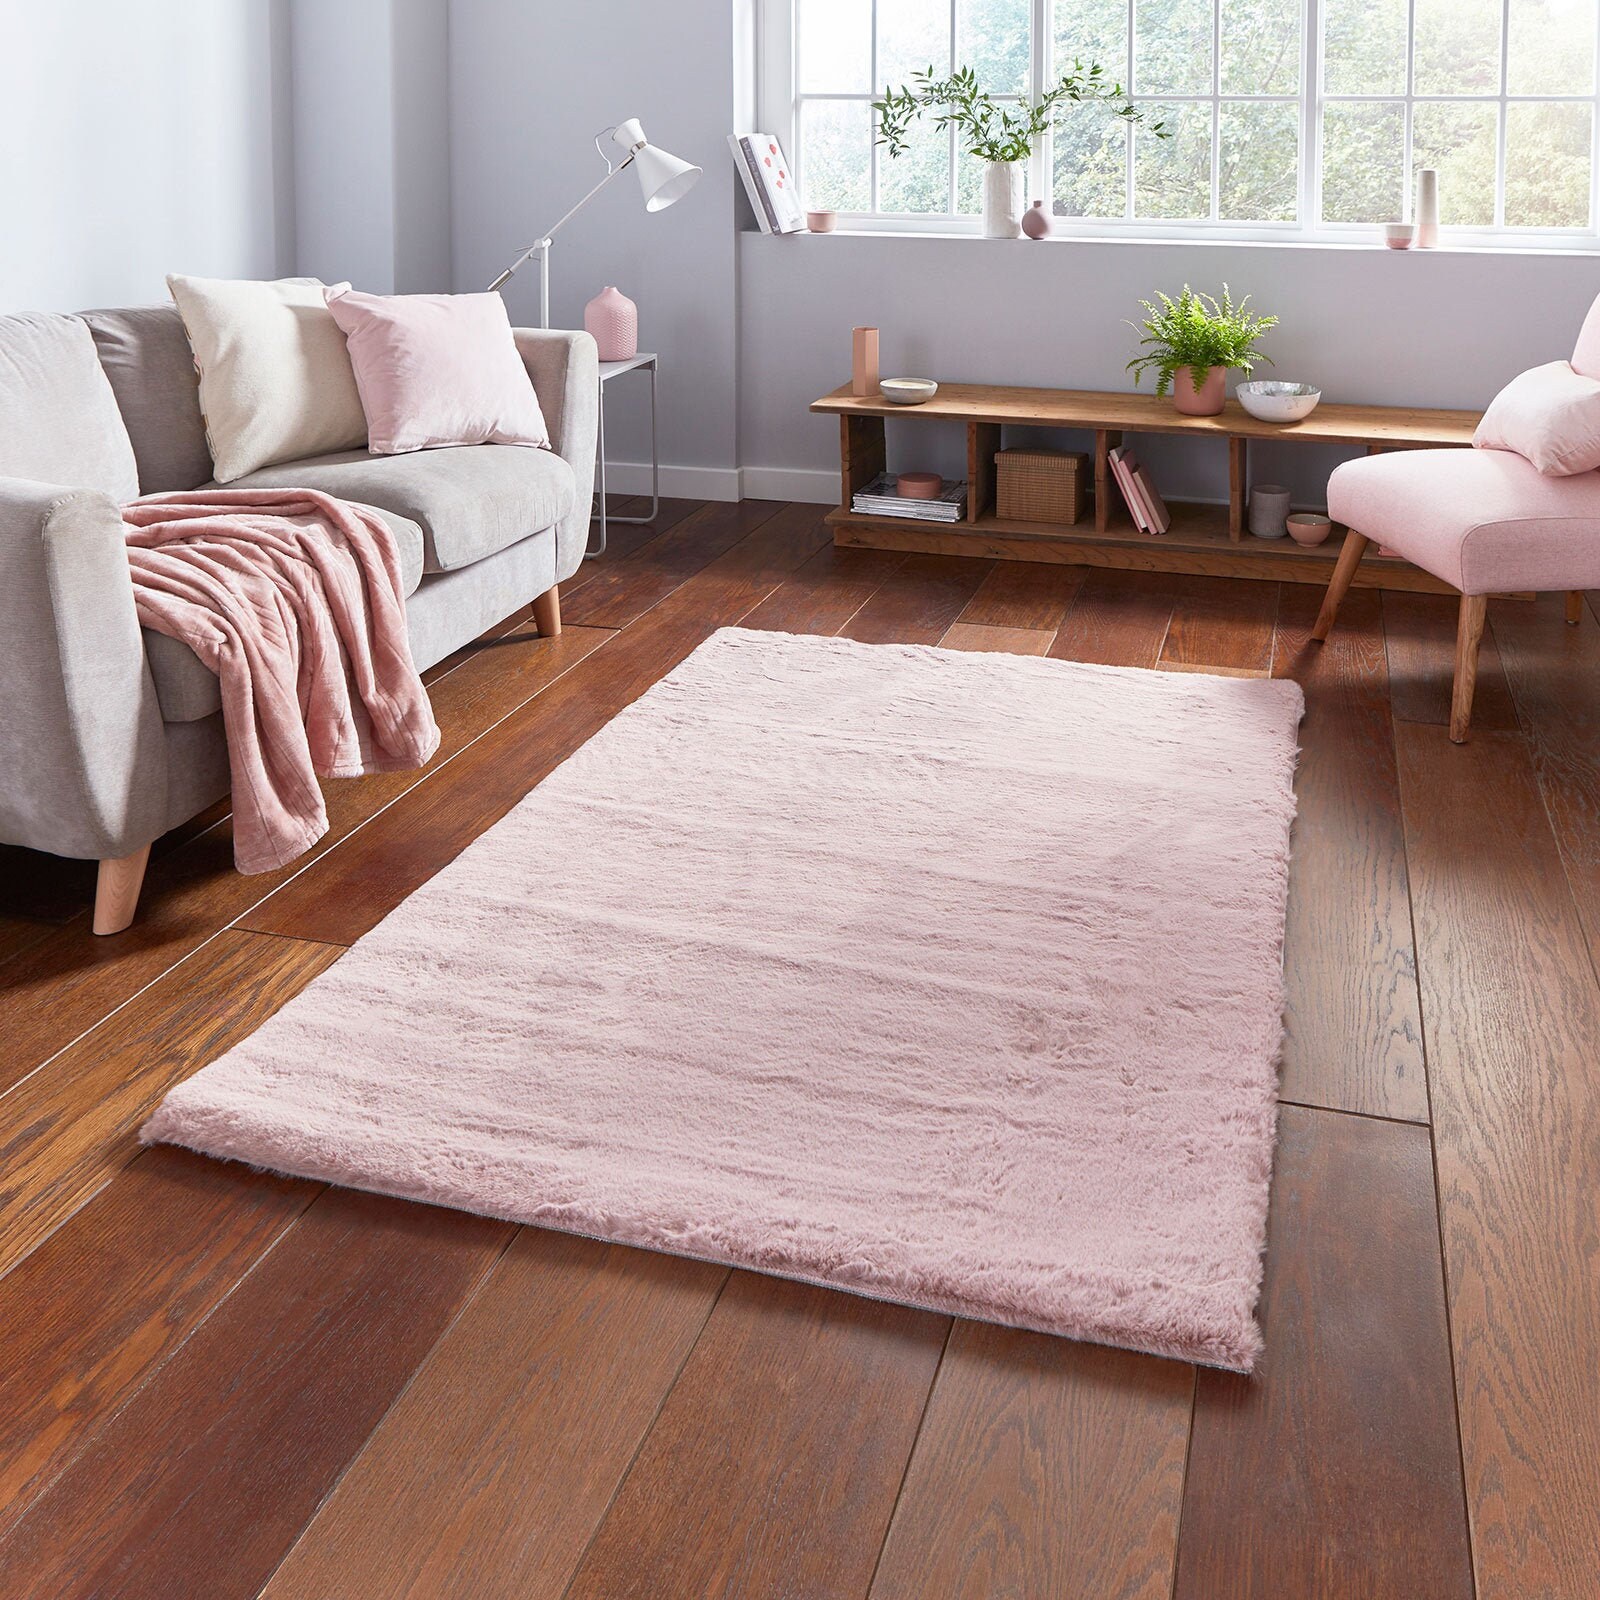 Rose Pink Shaggy RugModern Thick Non Shed RugsWarm Soft Small Large Rugs 